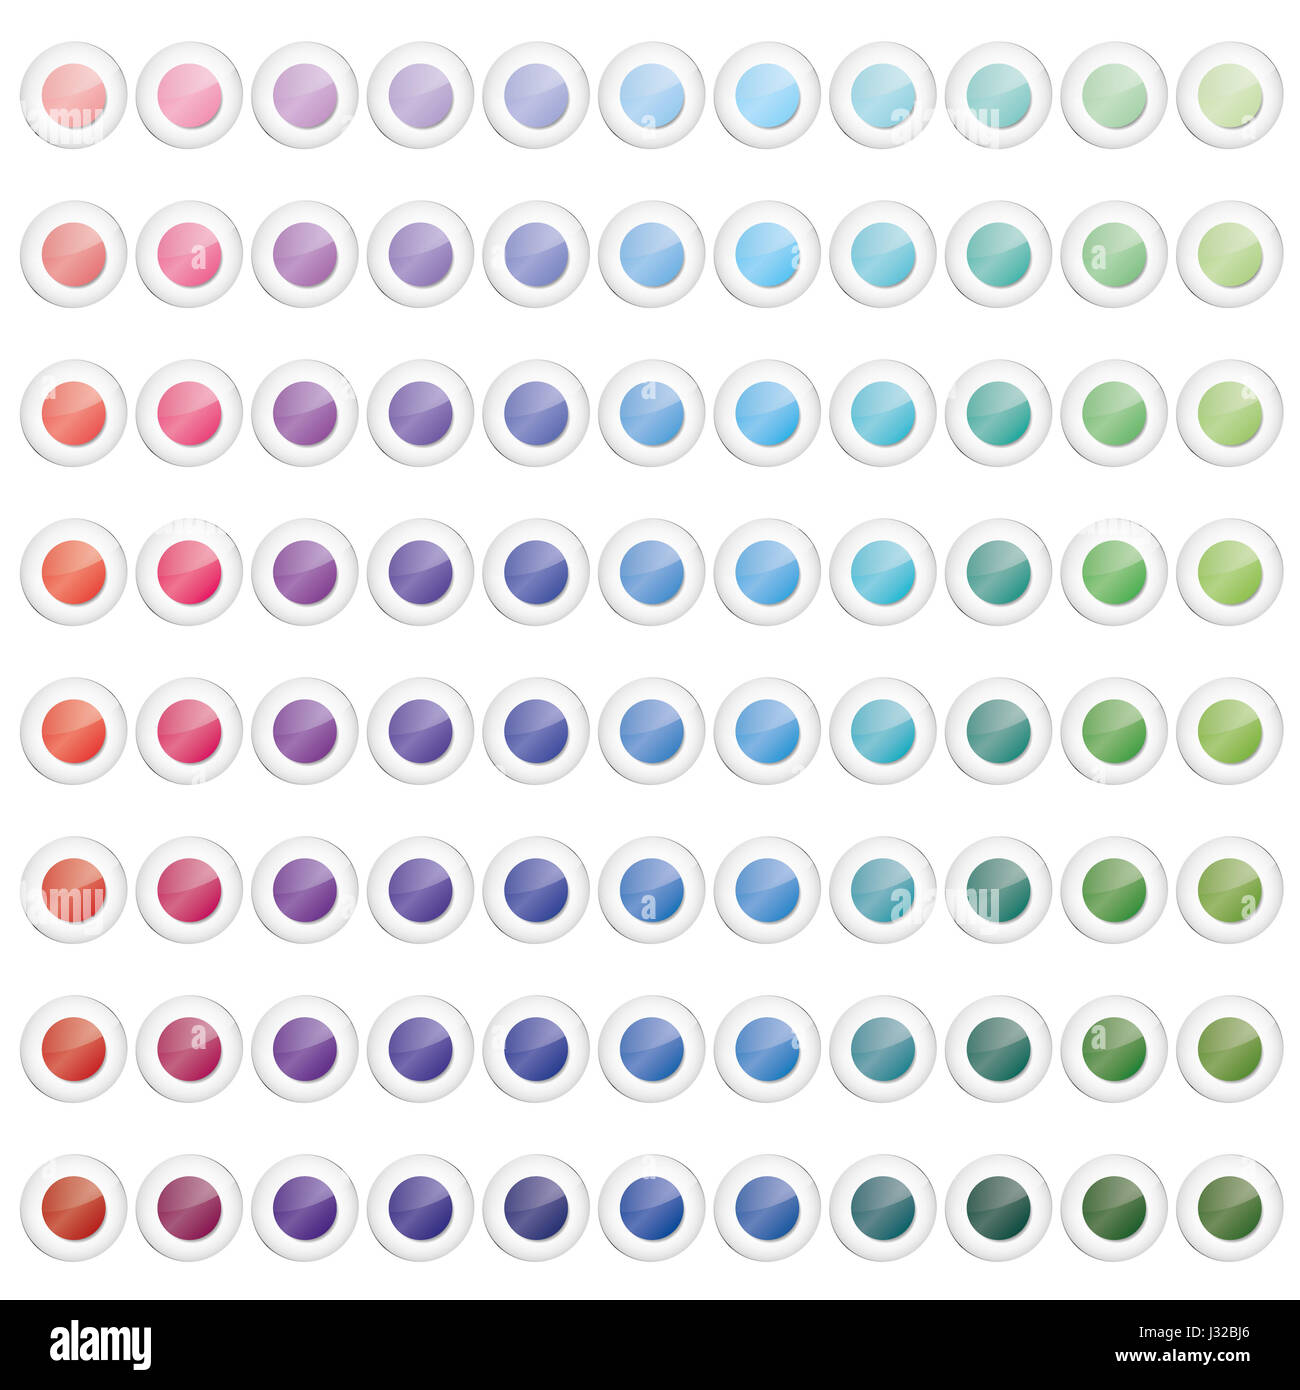 88 high quality colored glass info-graphic buttons. All isolated. Stock Photo